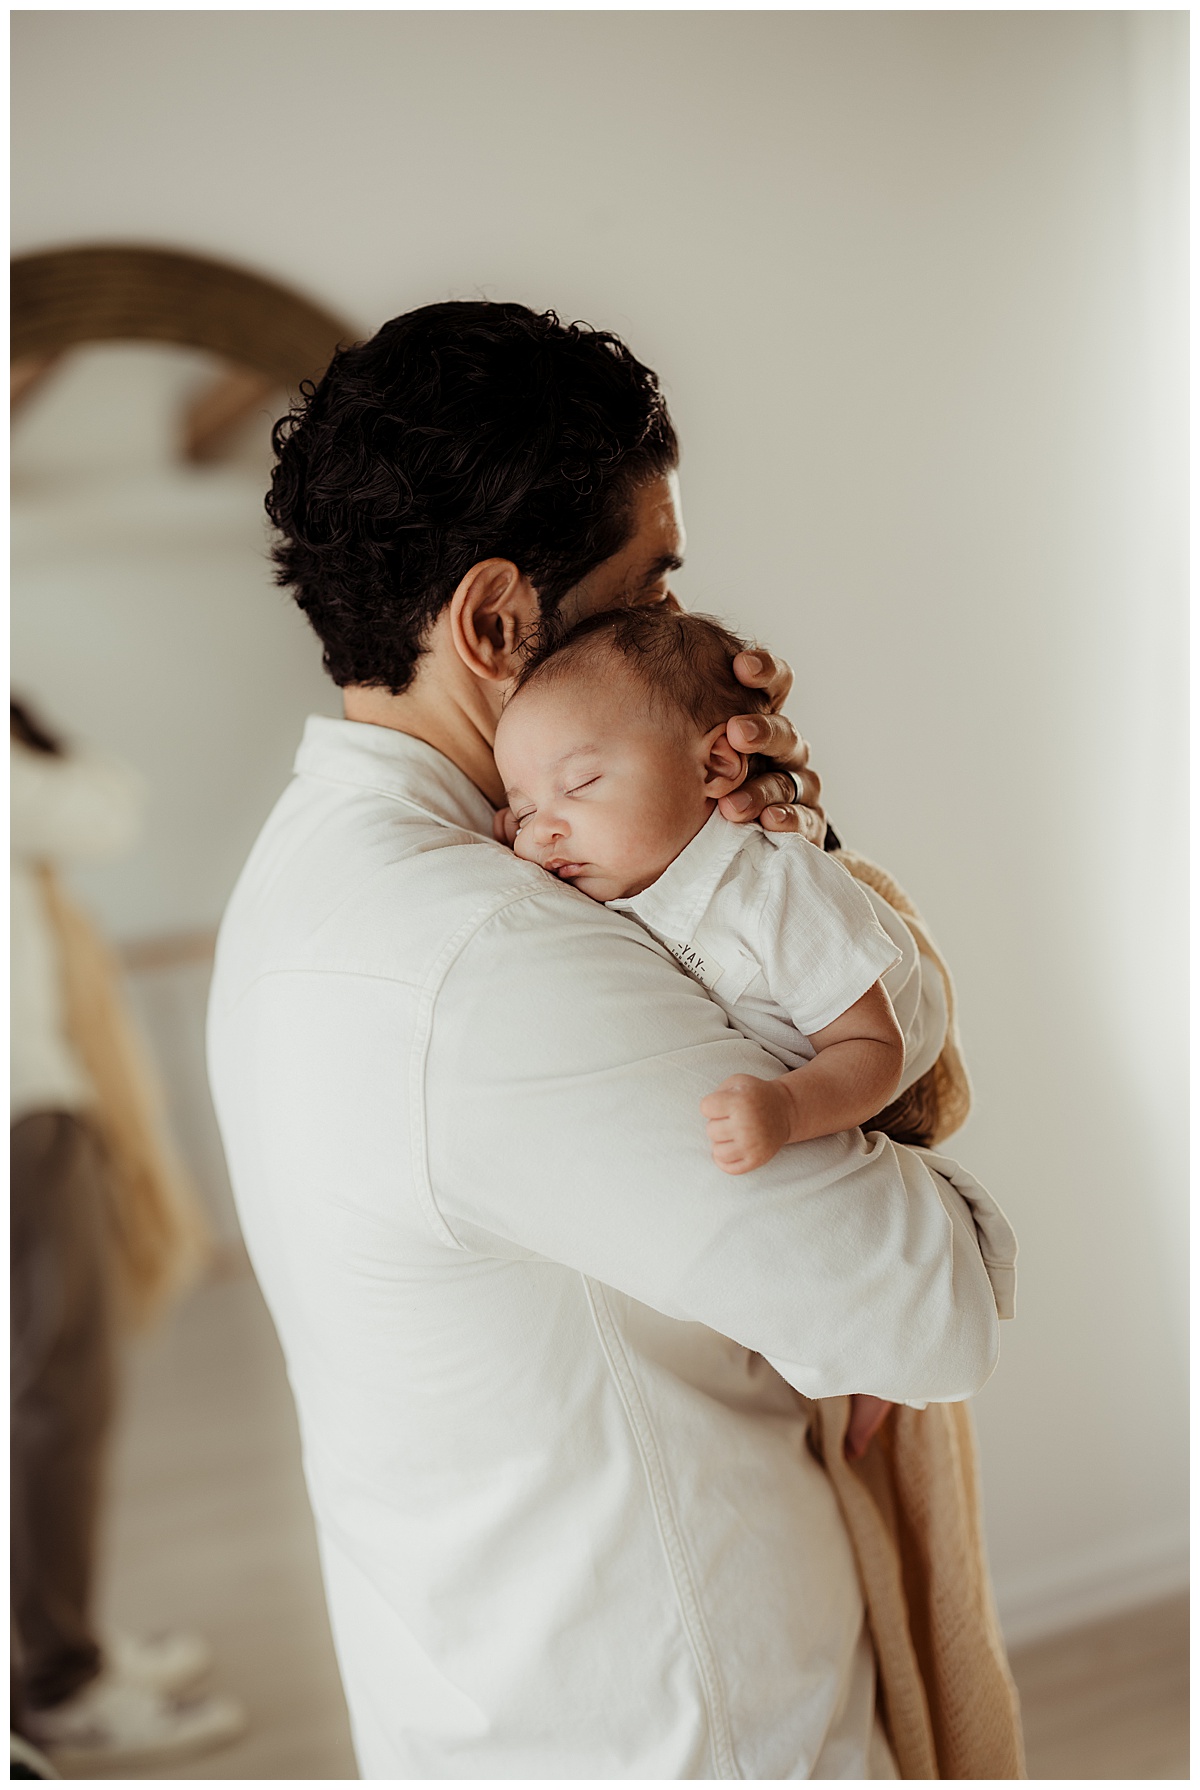 Son holds baby close for Norma Fayak Photography